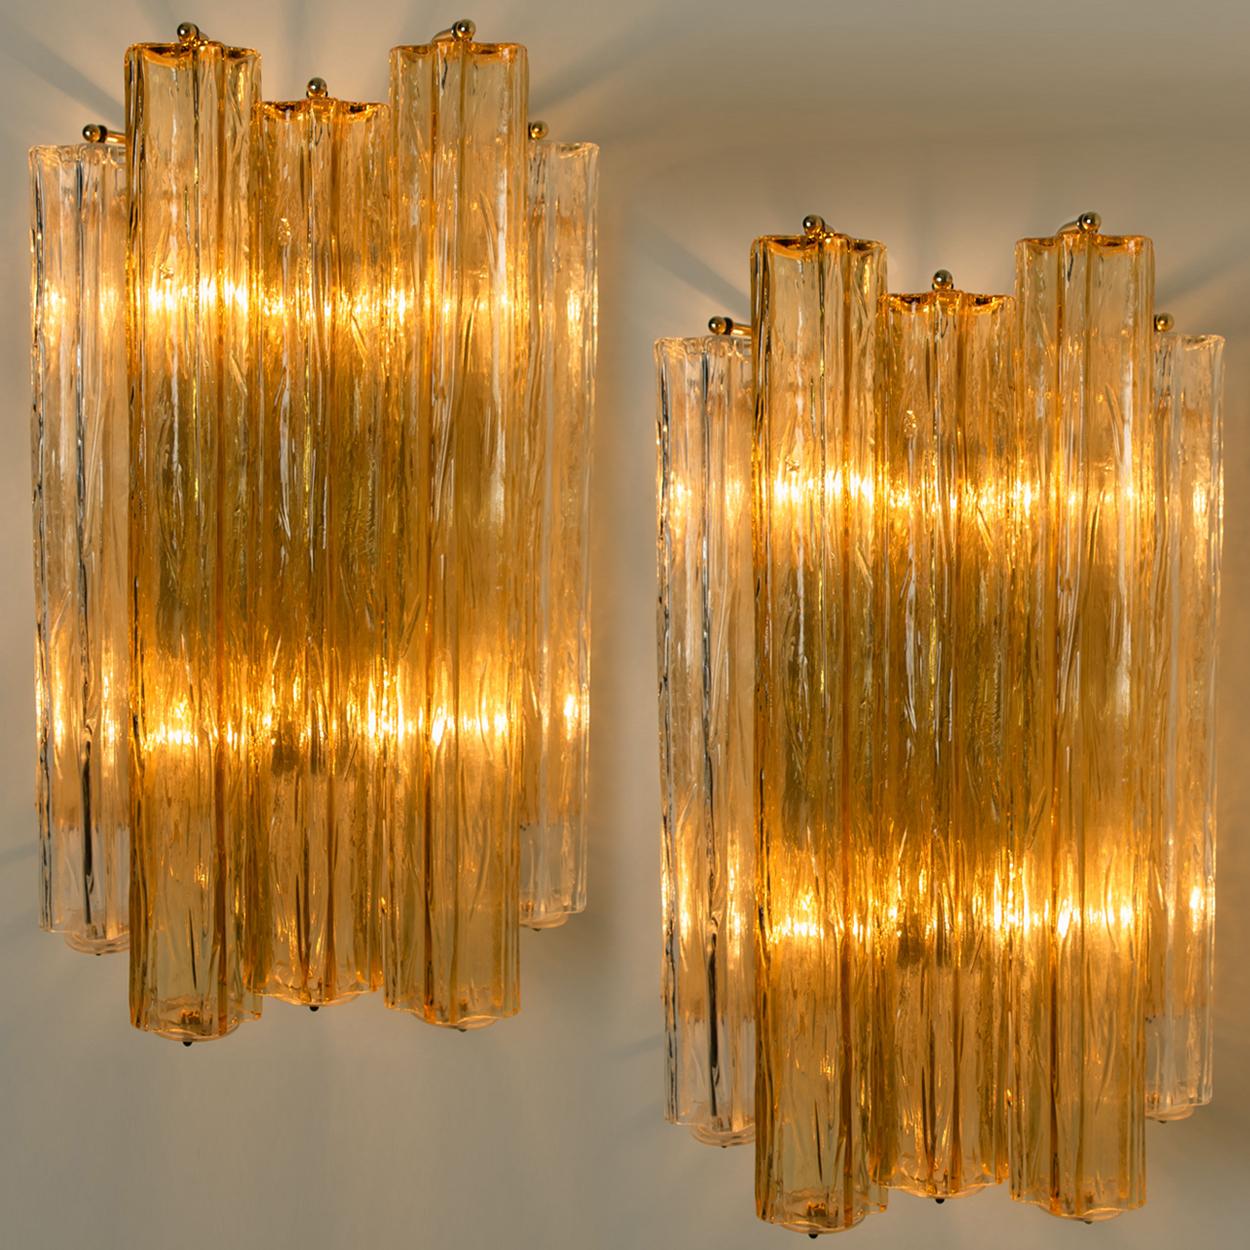 Steel 2 of the 2 Extra Large Wall Sconces or Wall Lights Murano Glass, Barovier & Toso